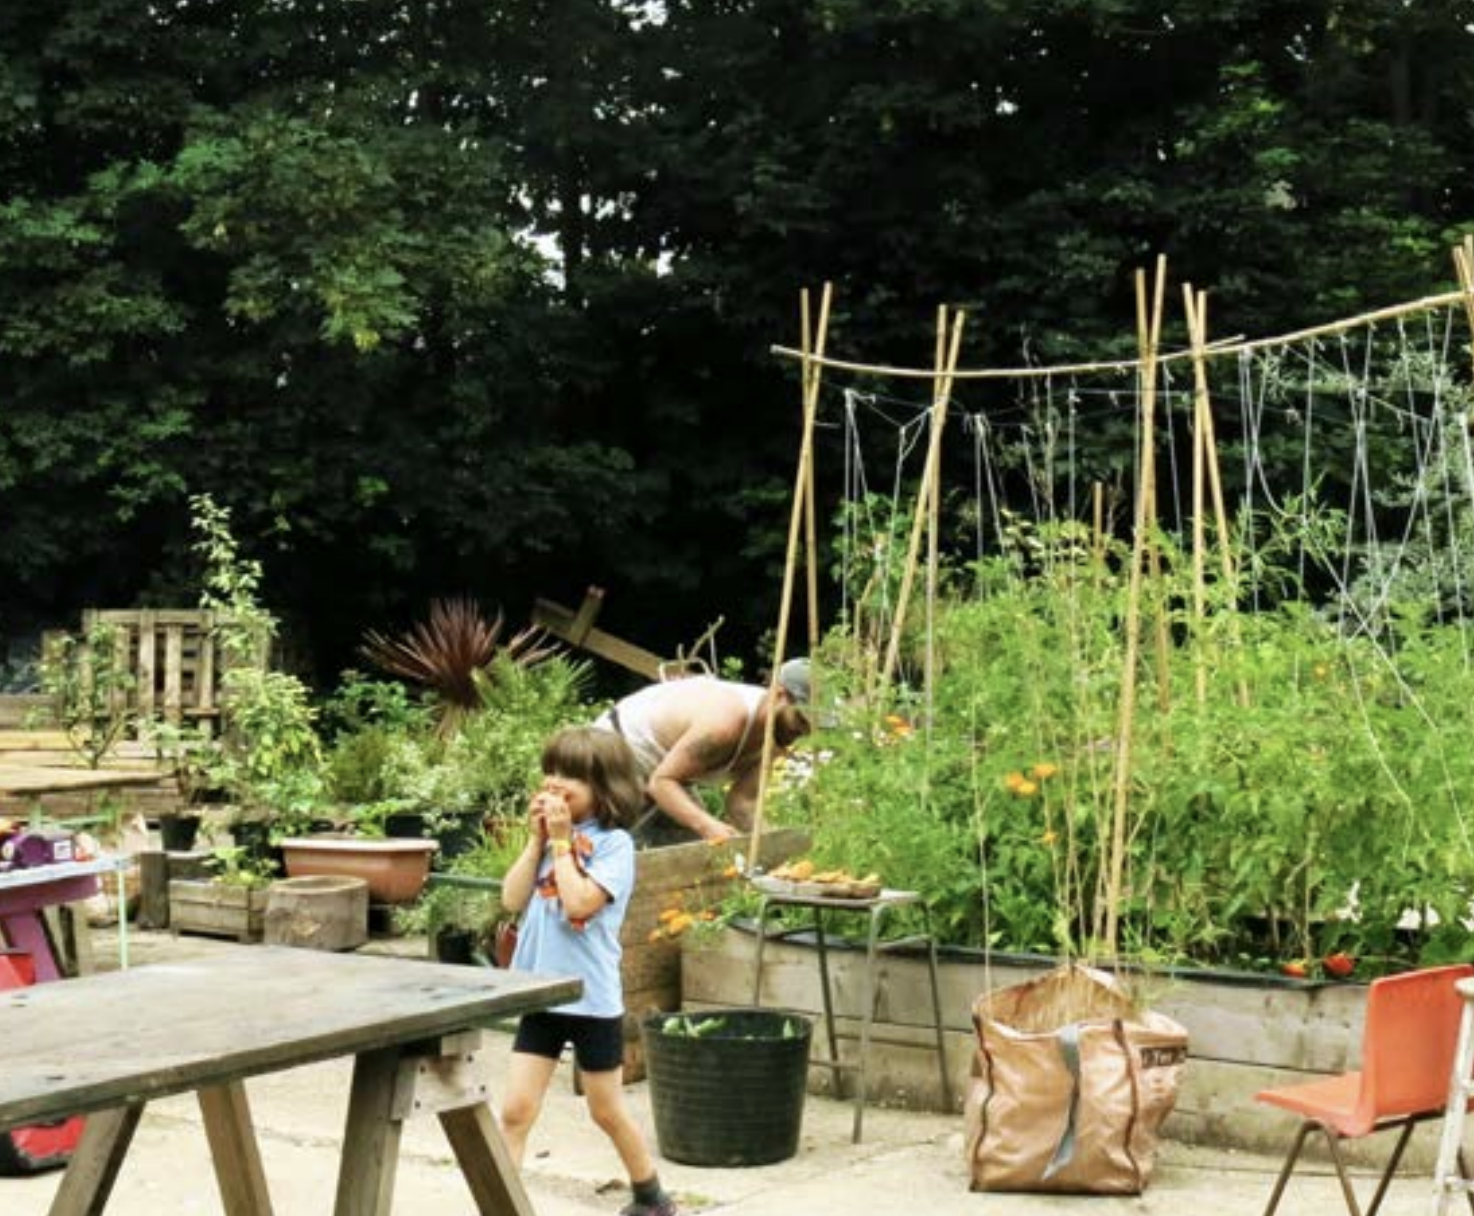 A man doing gardening and a child eating in an allotment.